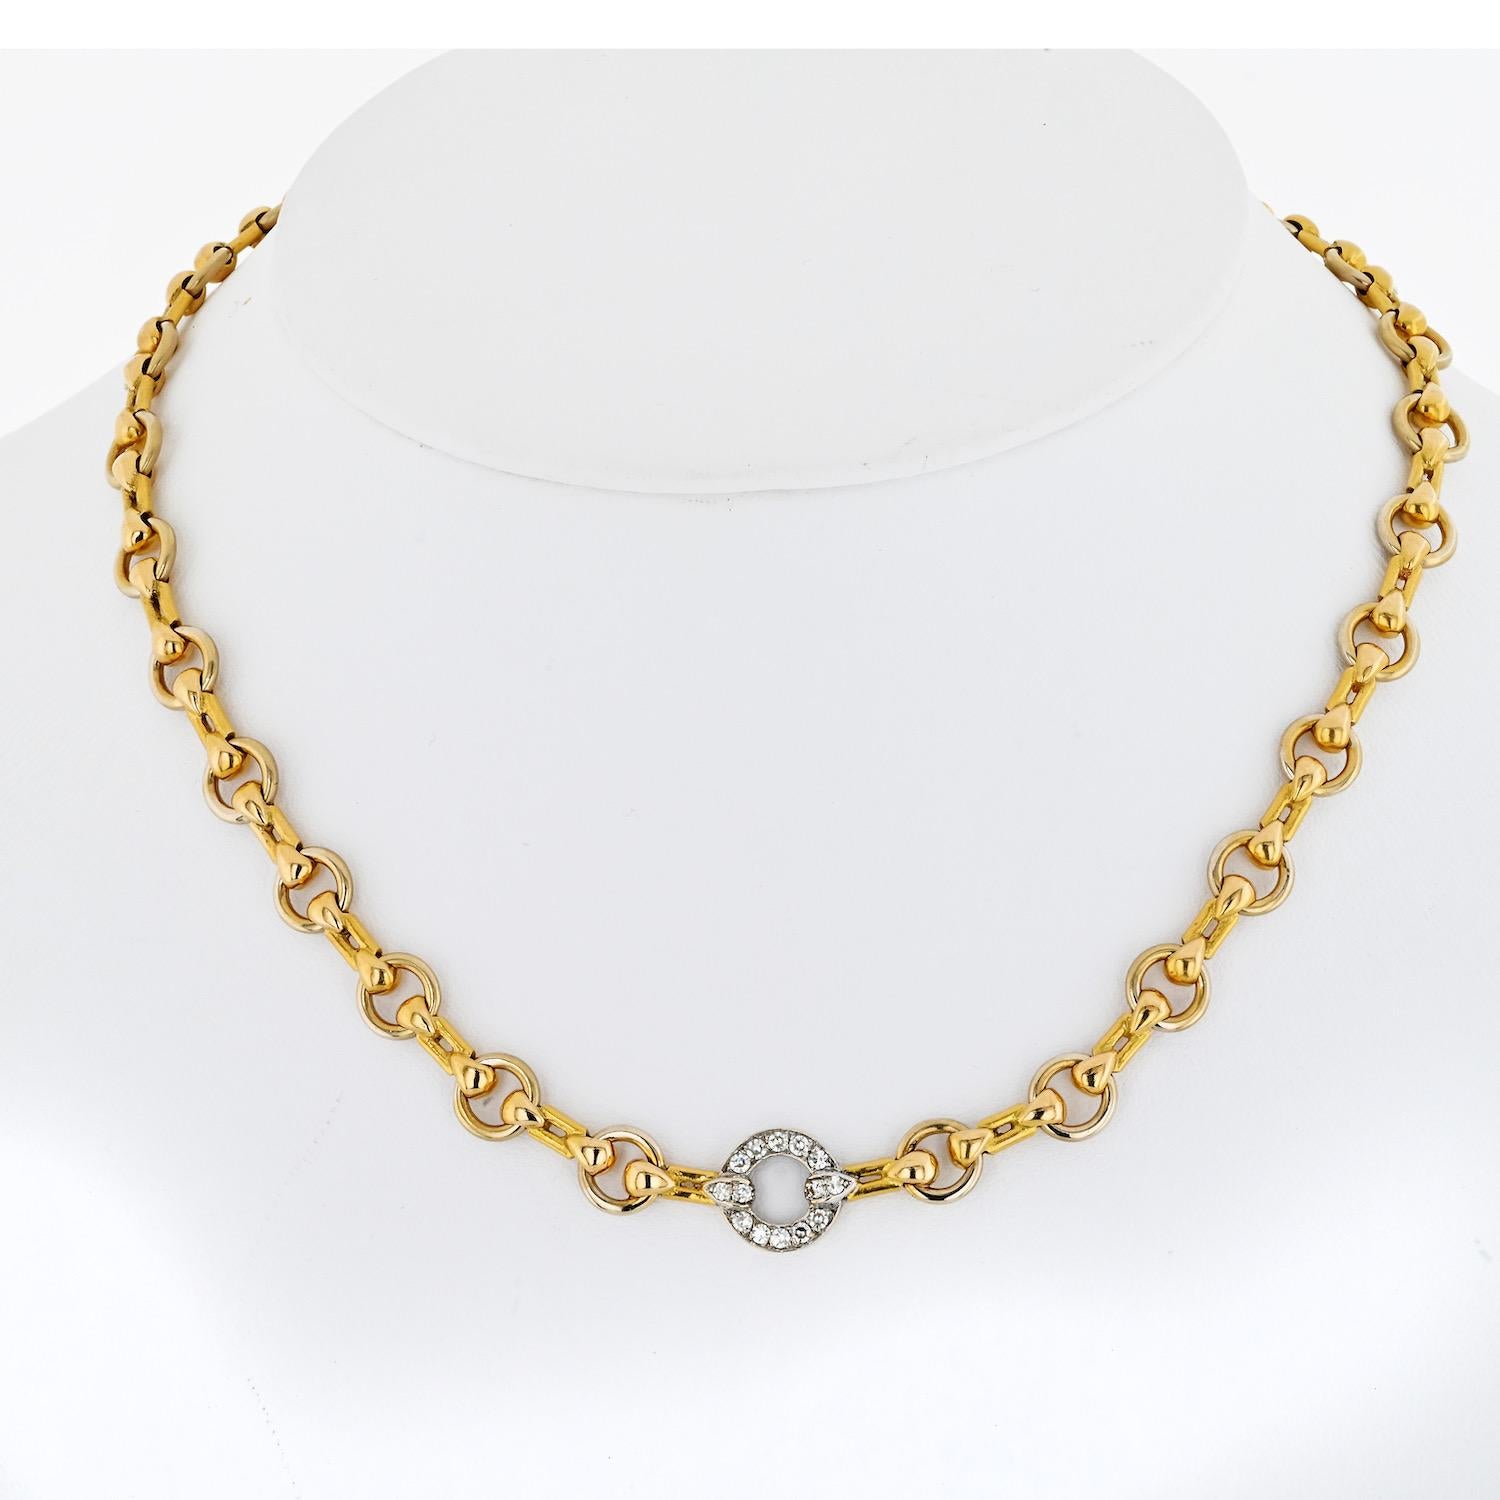 Indulge in the timeless allure of this Vintage Cartier 18K Yellow Gold 16-inch Chain, a classic piece that seamlessly combines luxury with everyday wearability. Crafted with precision, the 44 grams of 18K yellow gold evoke a sense of enduring